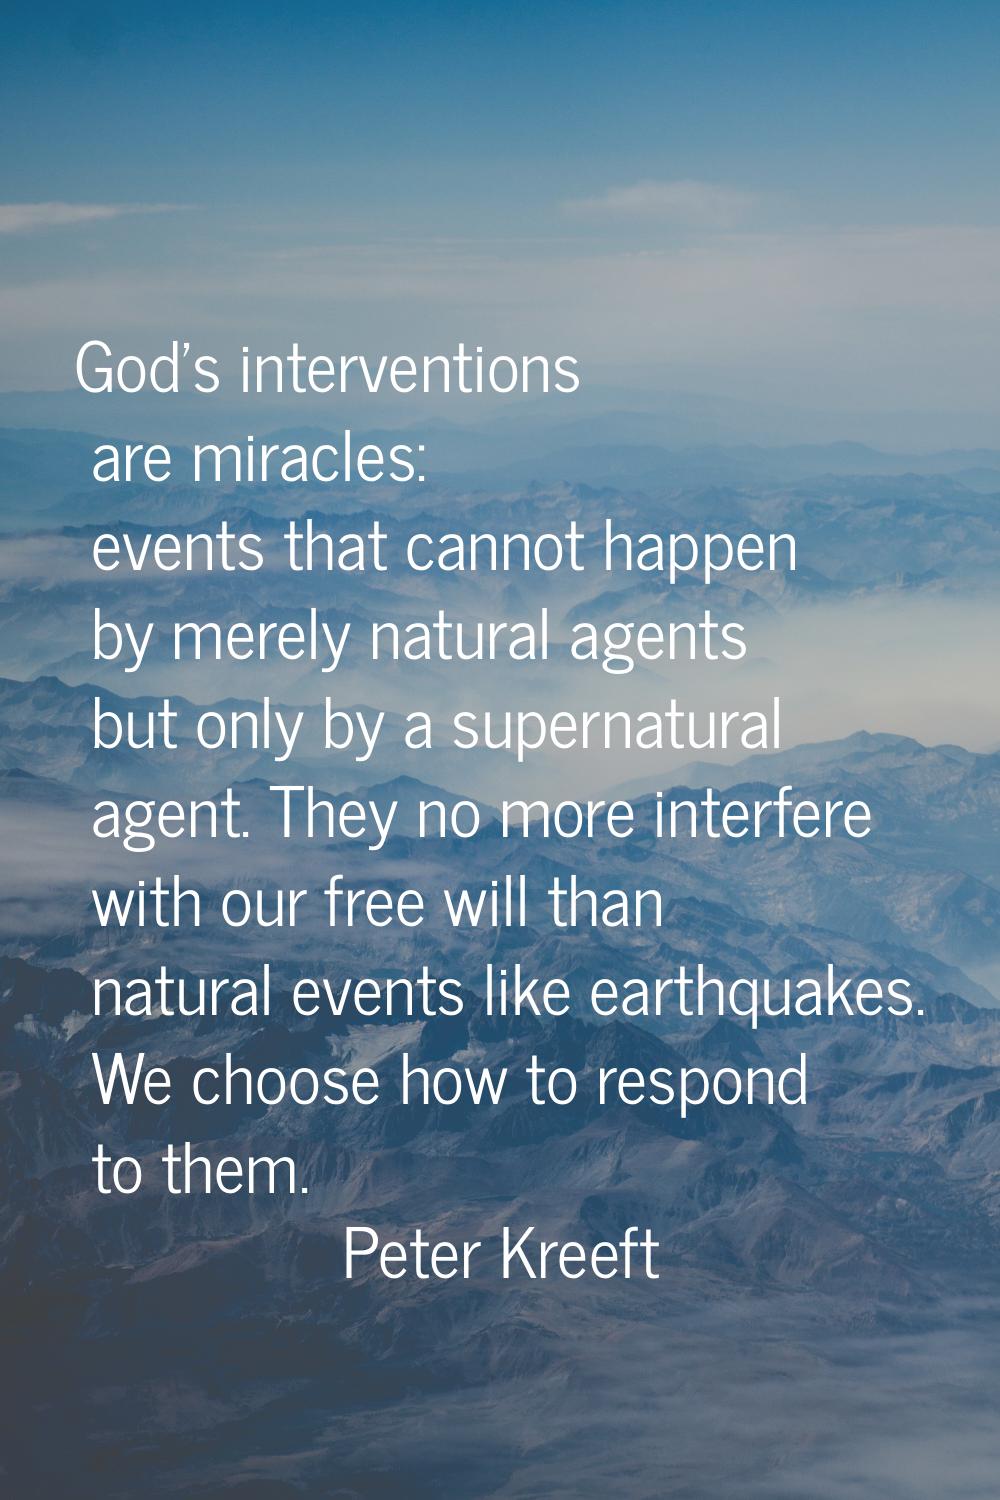 God's interventions are miracles: events that cannot happen by merely natural agents but only by a 